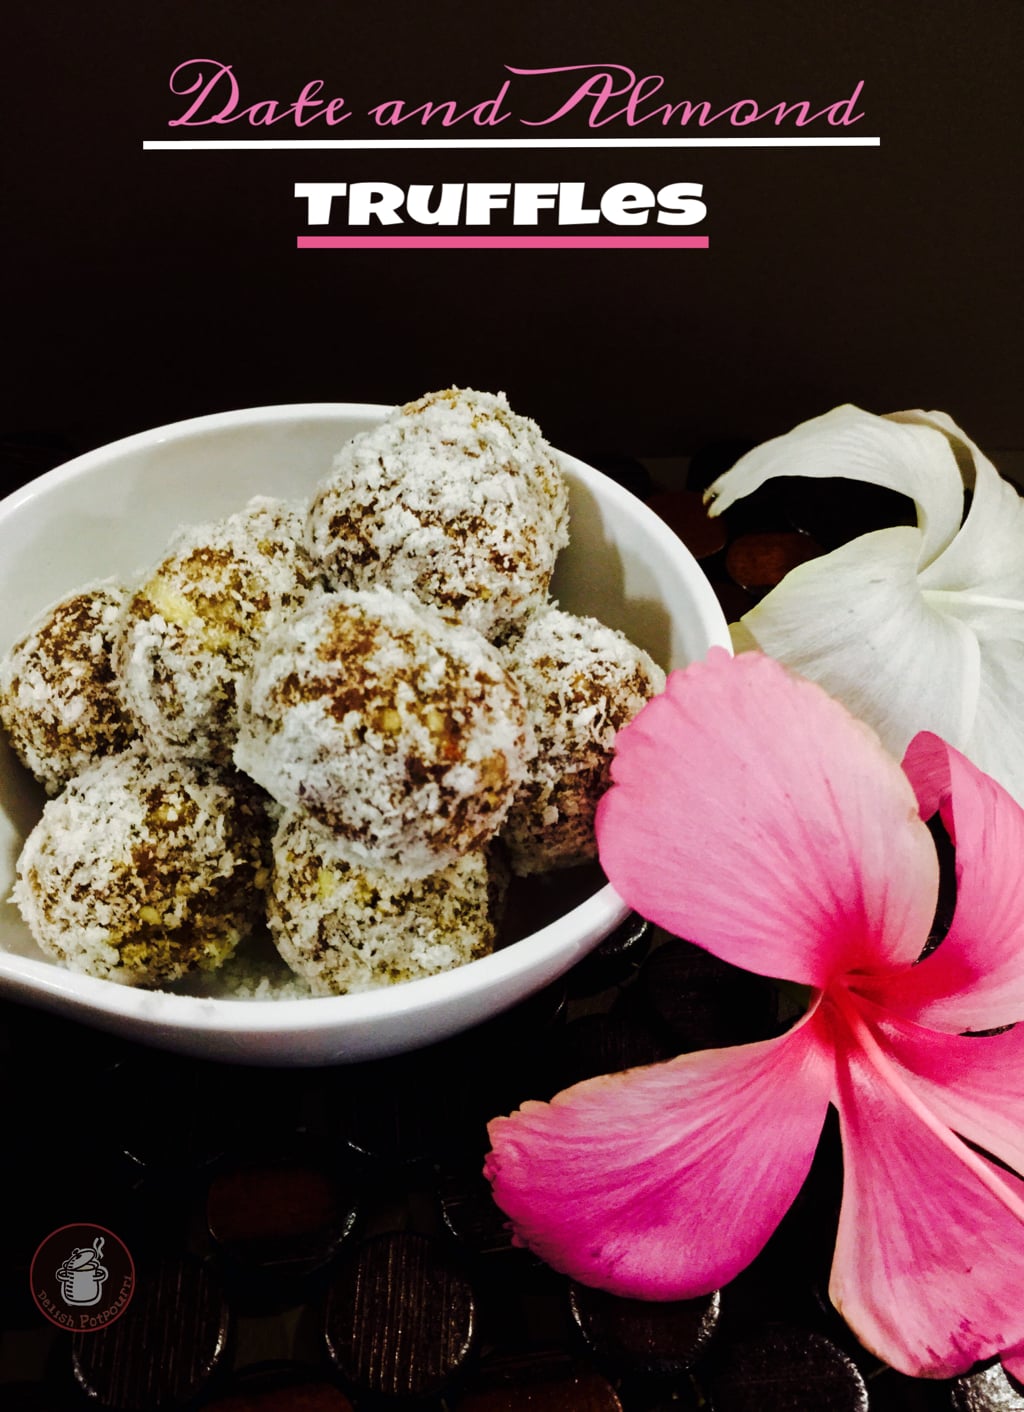 Date and Almond truffles